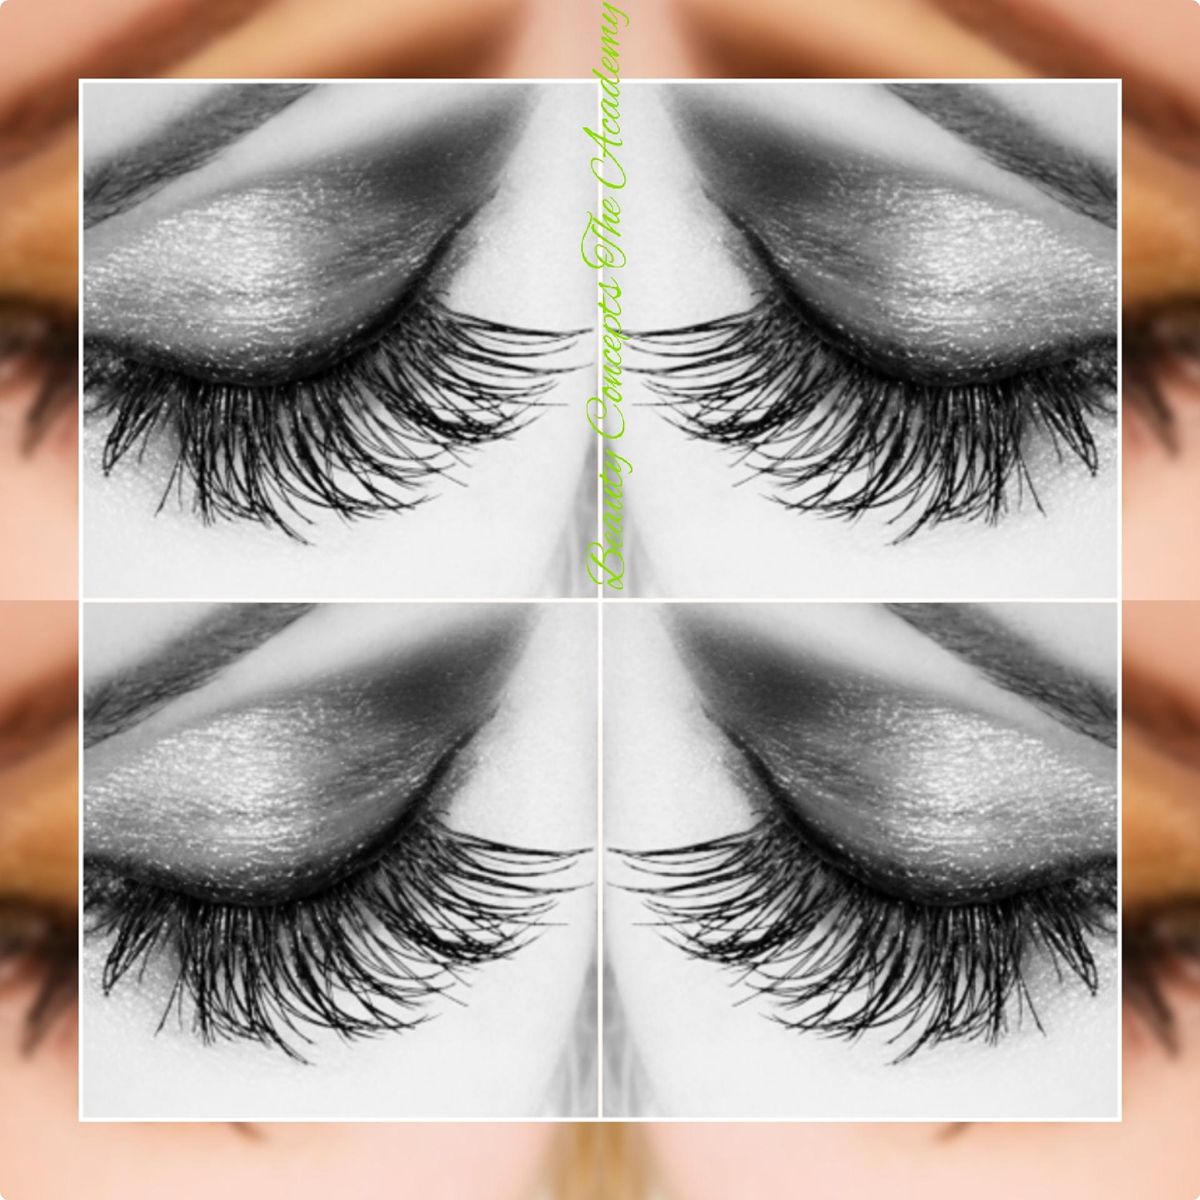 Luscious Lashes: Eyelash Extensions 2-Day "Hands-on" class